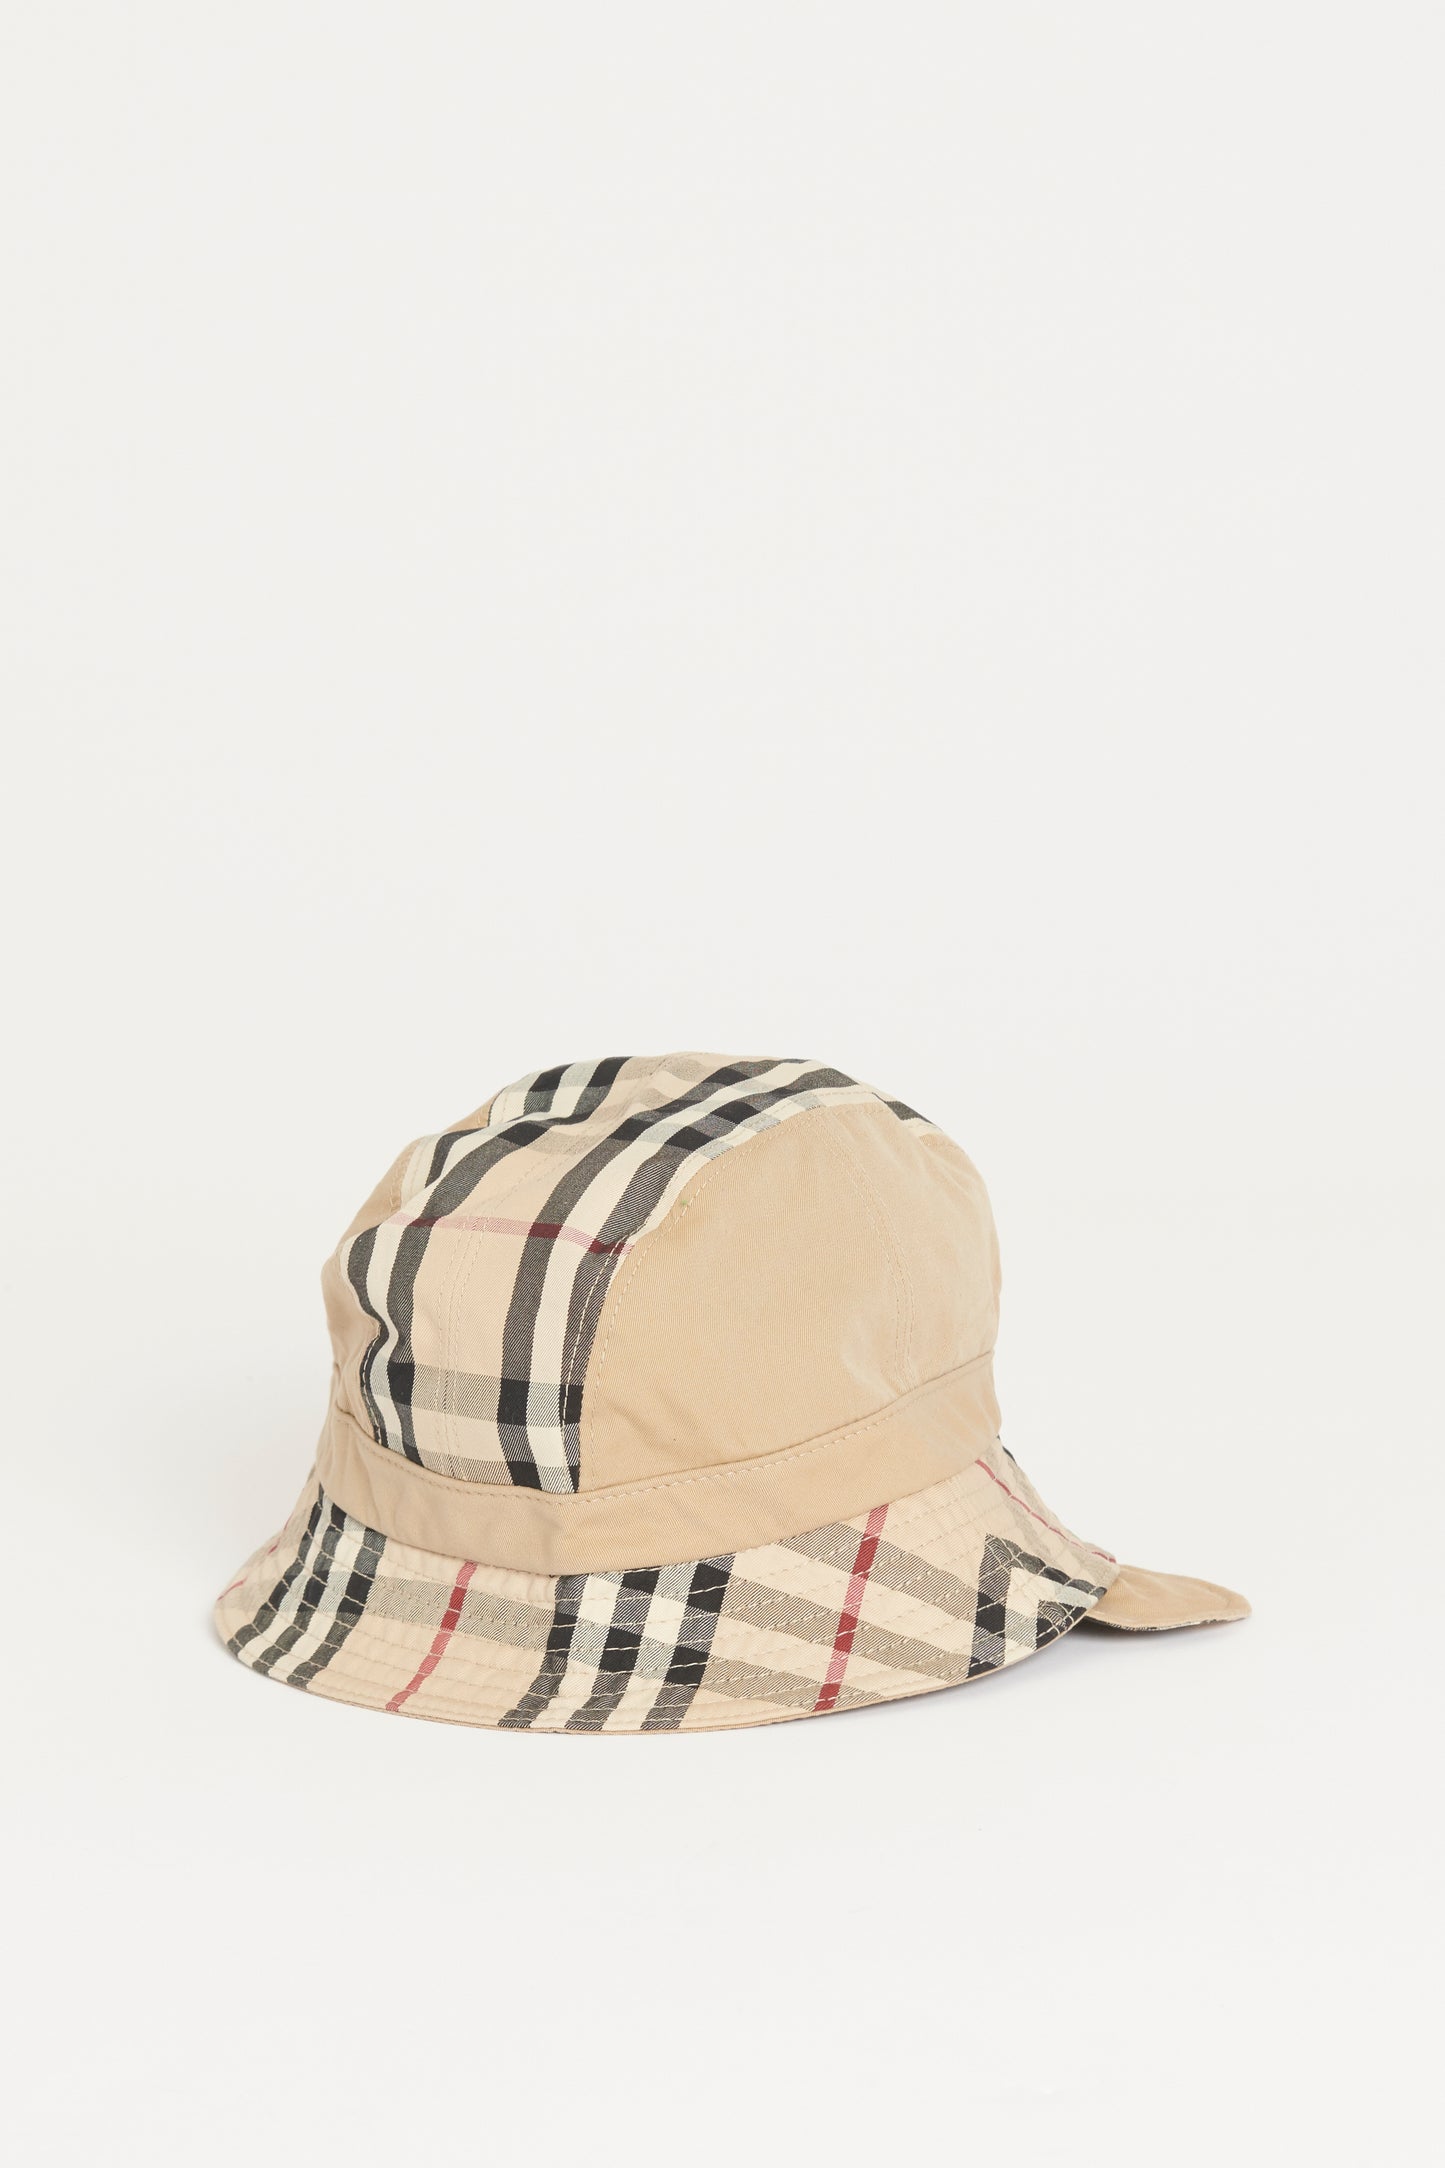 2018 Beige Preowned Bucket Hat With Nova Check Accents